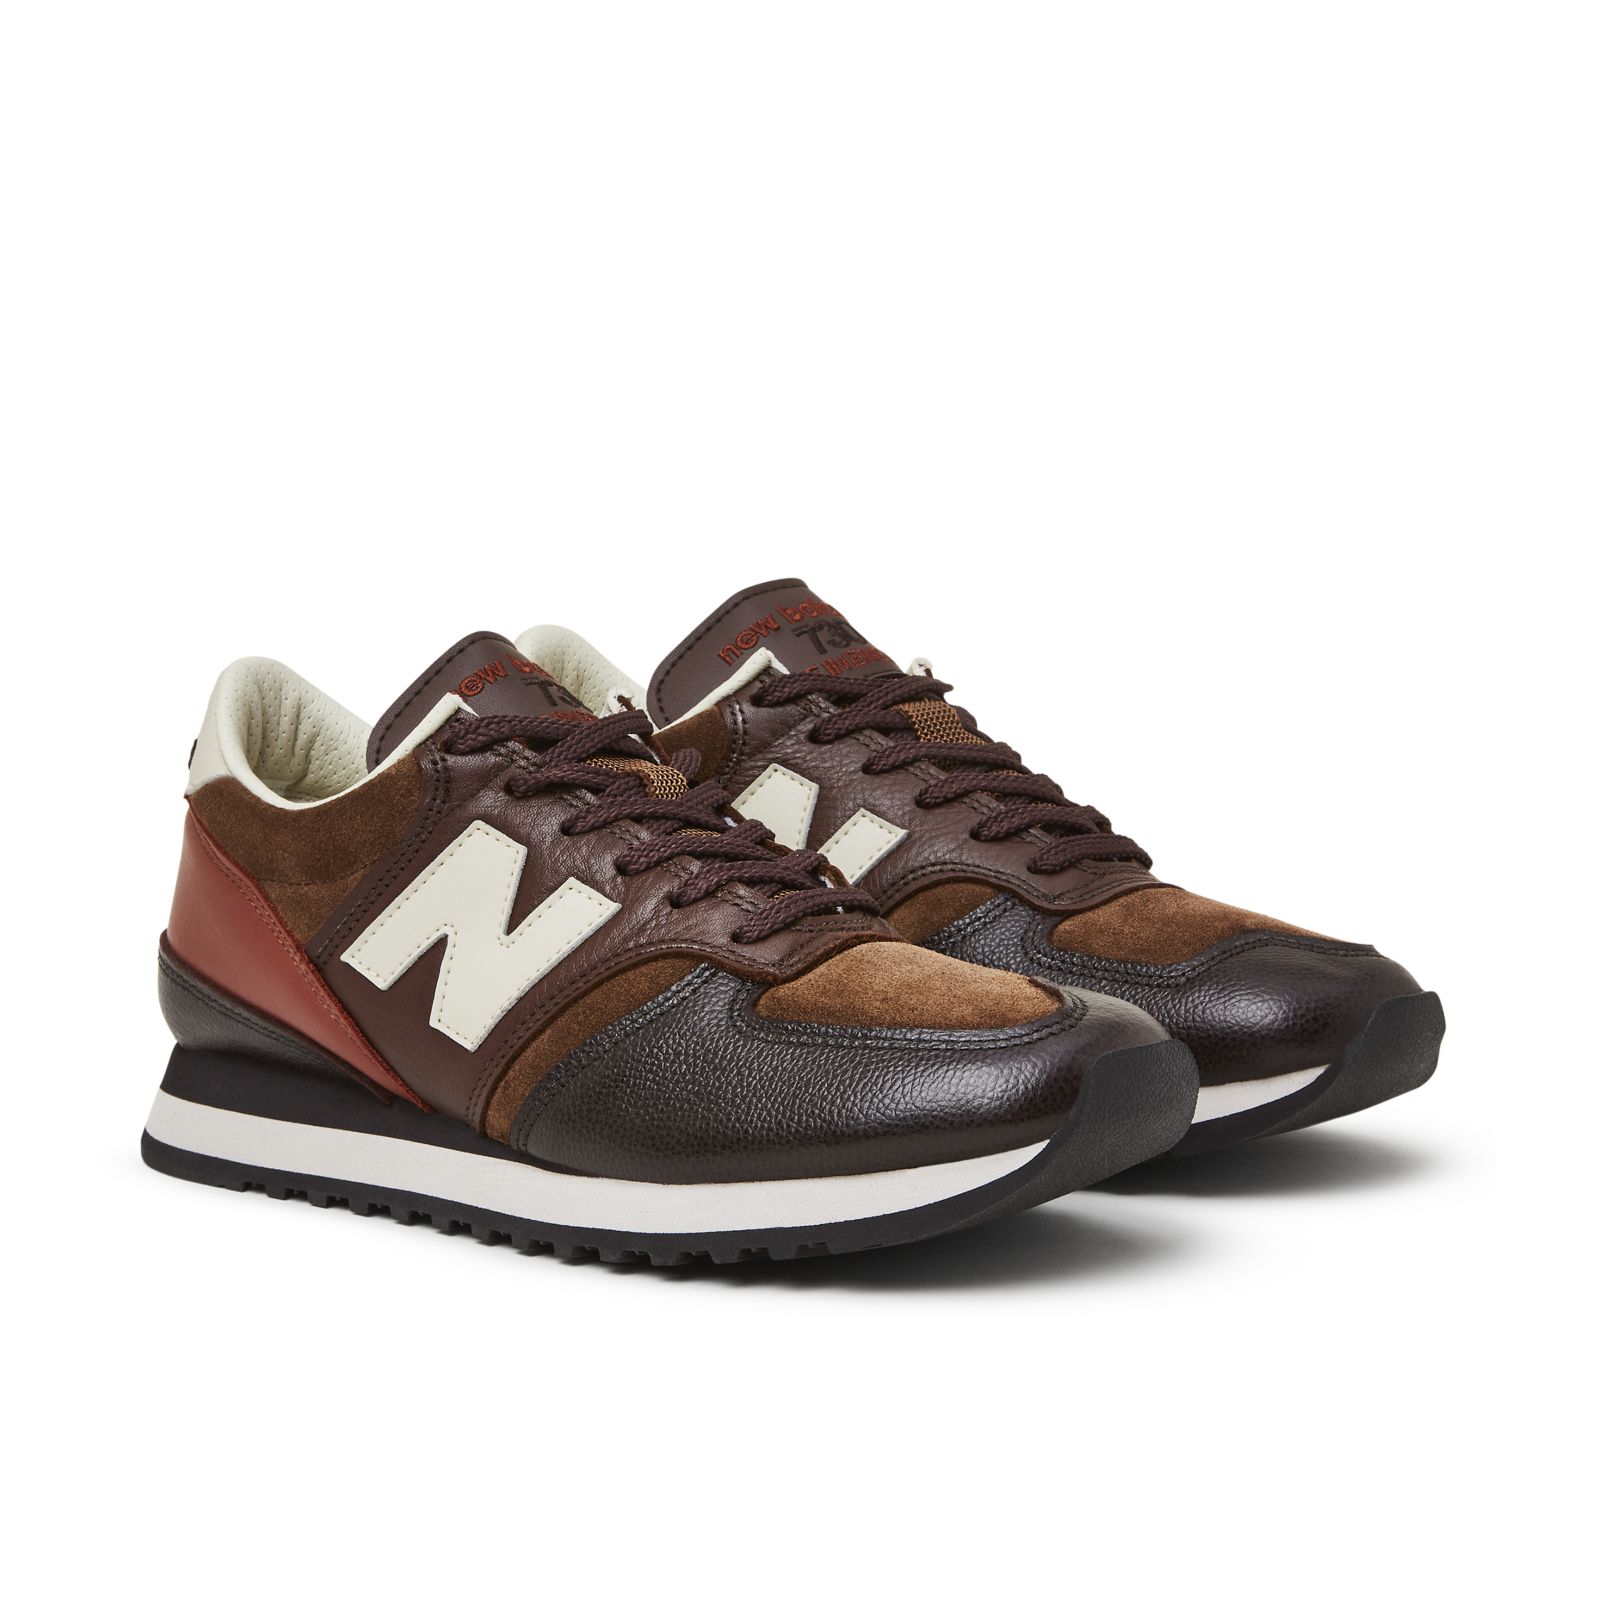 Men's MADE in UK 730 Shoes - New Balance